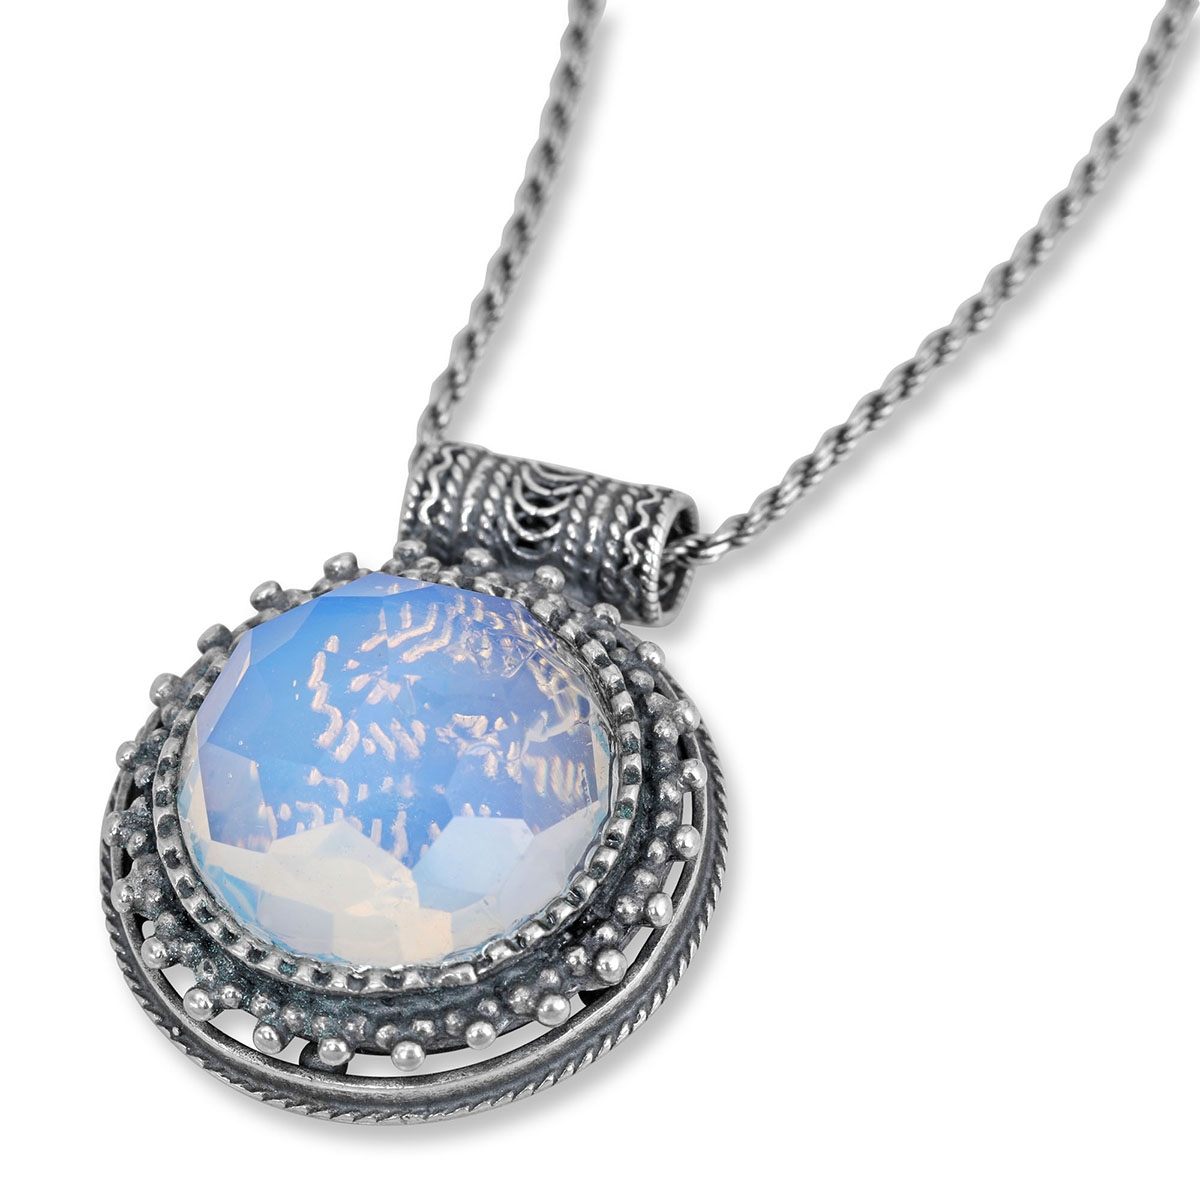 Shema Israel: Large Ornate Silver Necklace with Giant Opalite Stone - 1